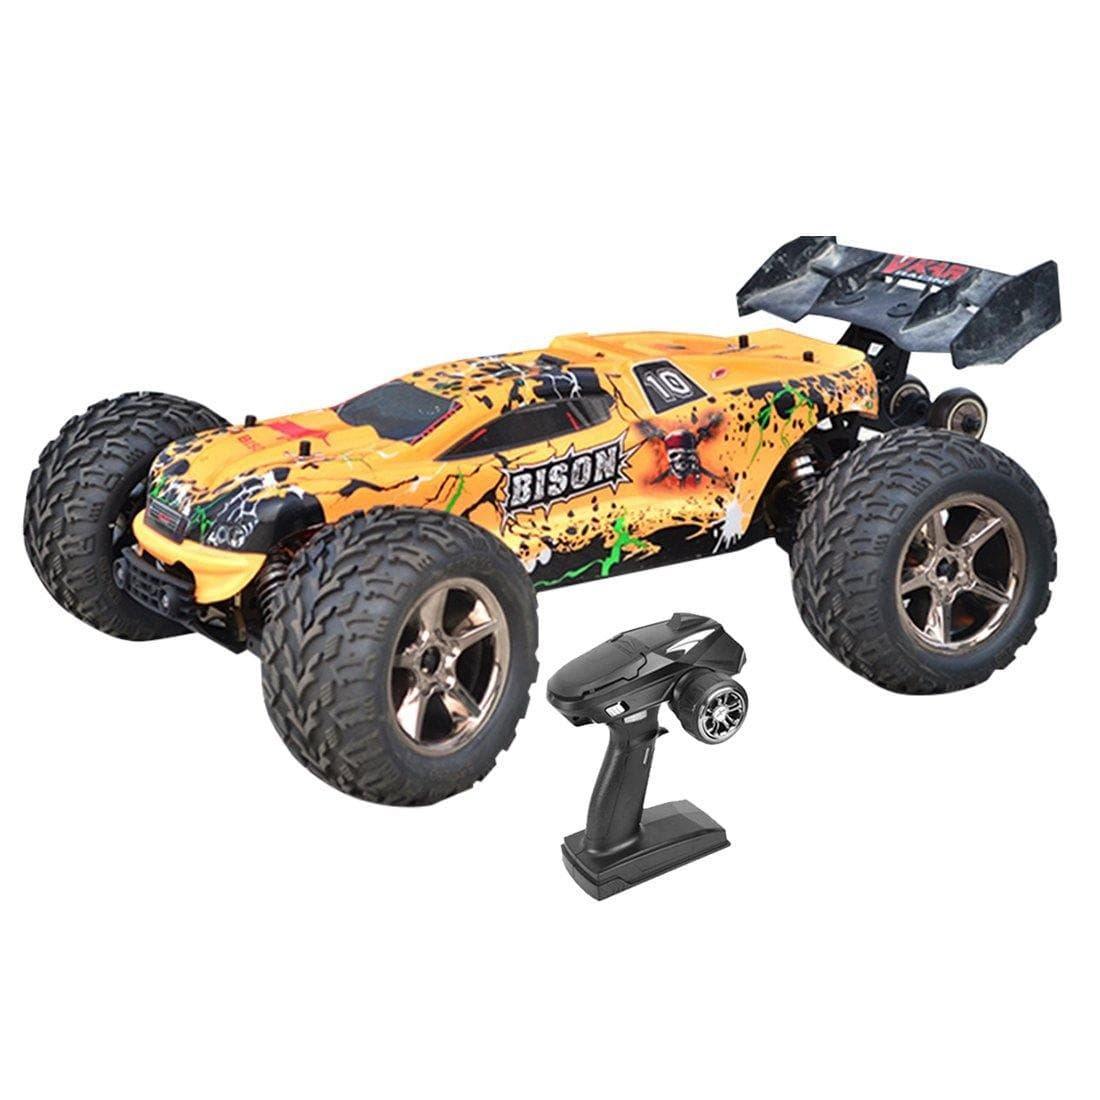 What's the Fastest Remote Control Car?